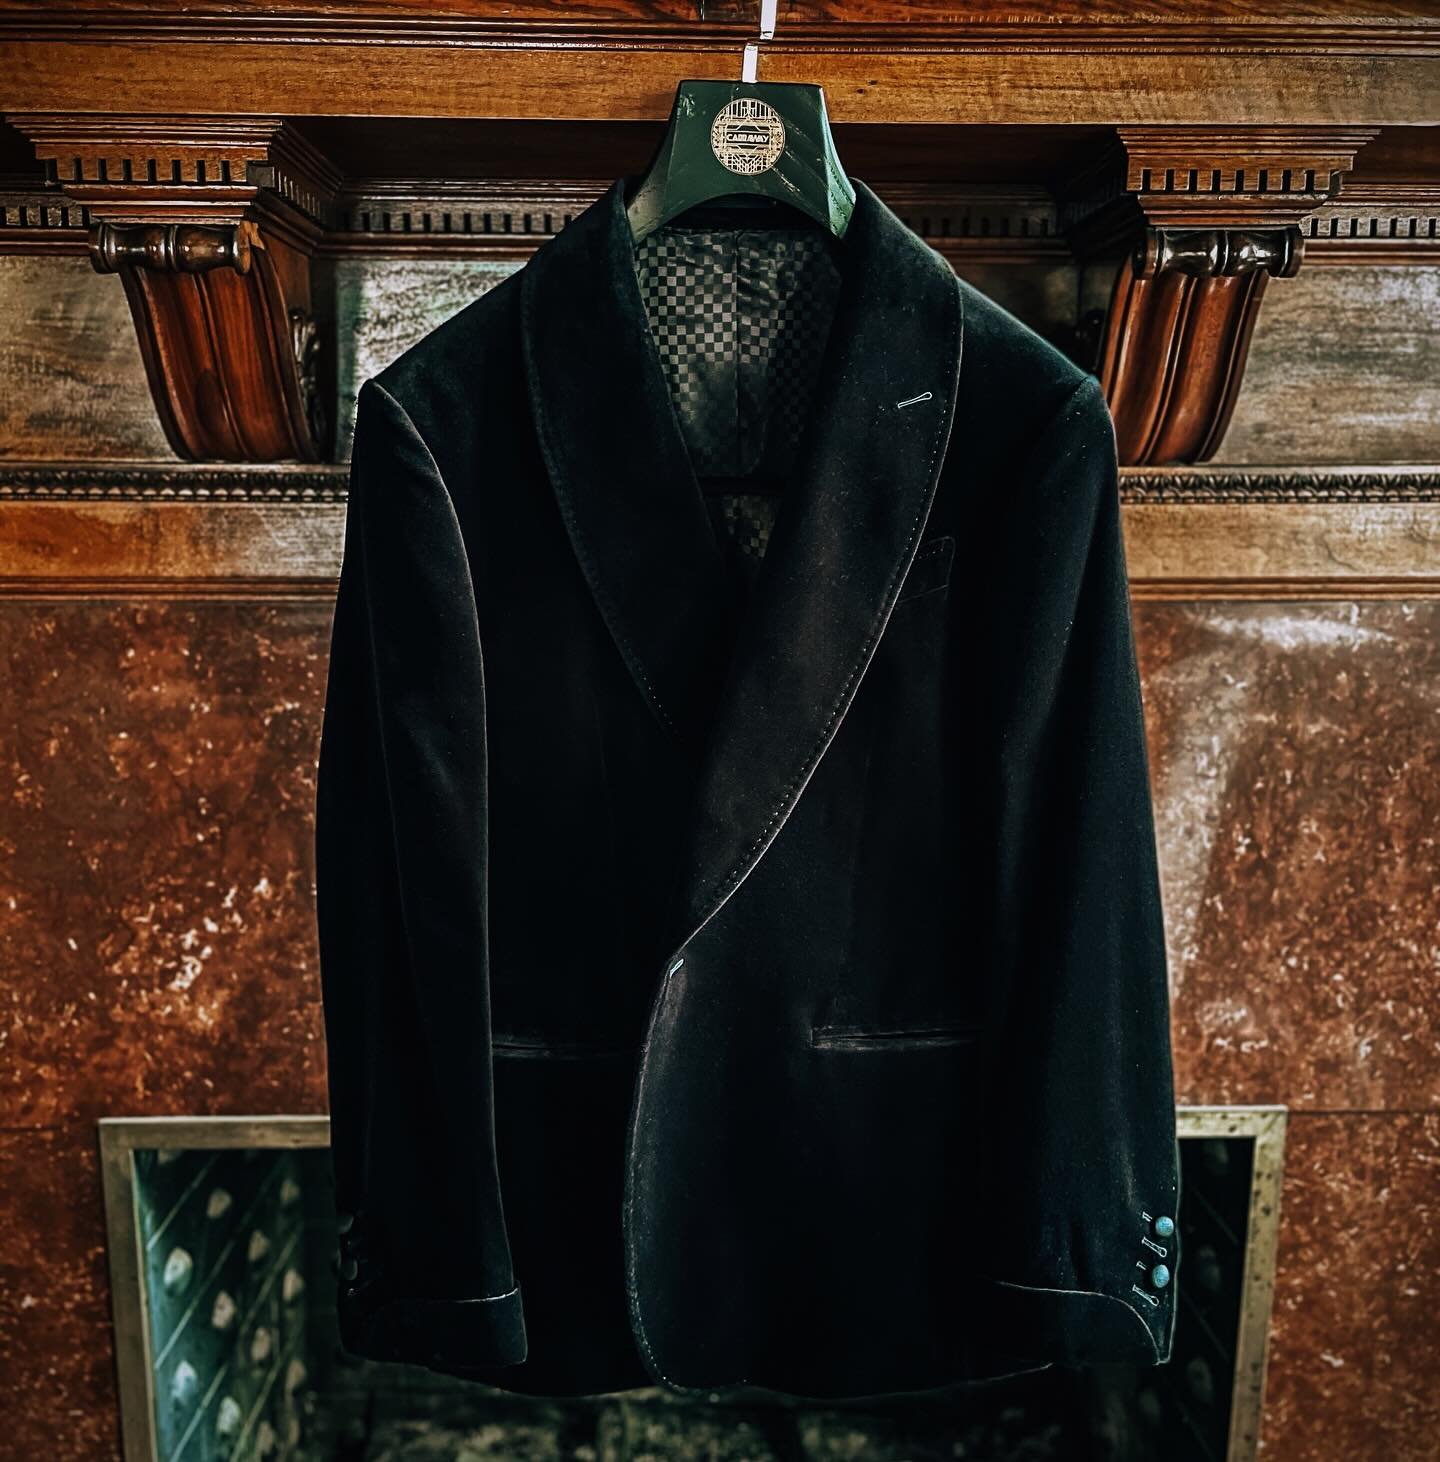 The Smoking Jacket, also known as a dinner jacket or a lounge jacket, is a type of jacket that was originally designed to be worn while smoking tobacco. It was popularized in the 19th century and has since become a symbol of refined taste and sophist